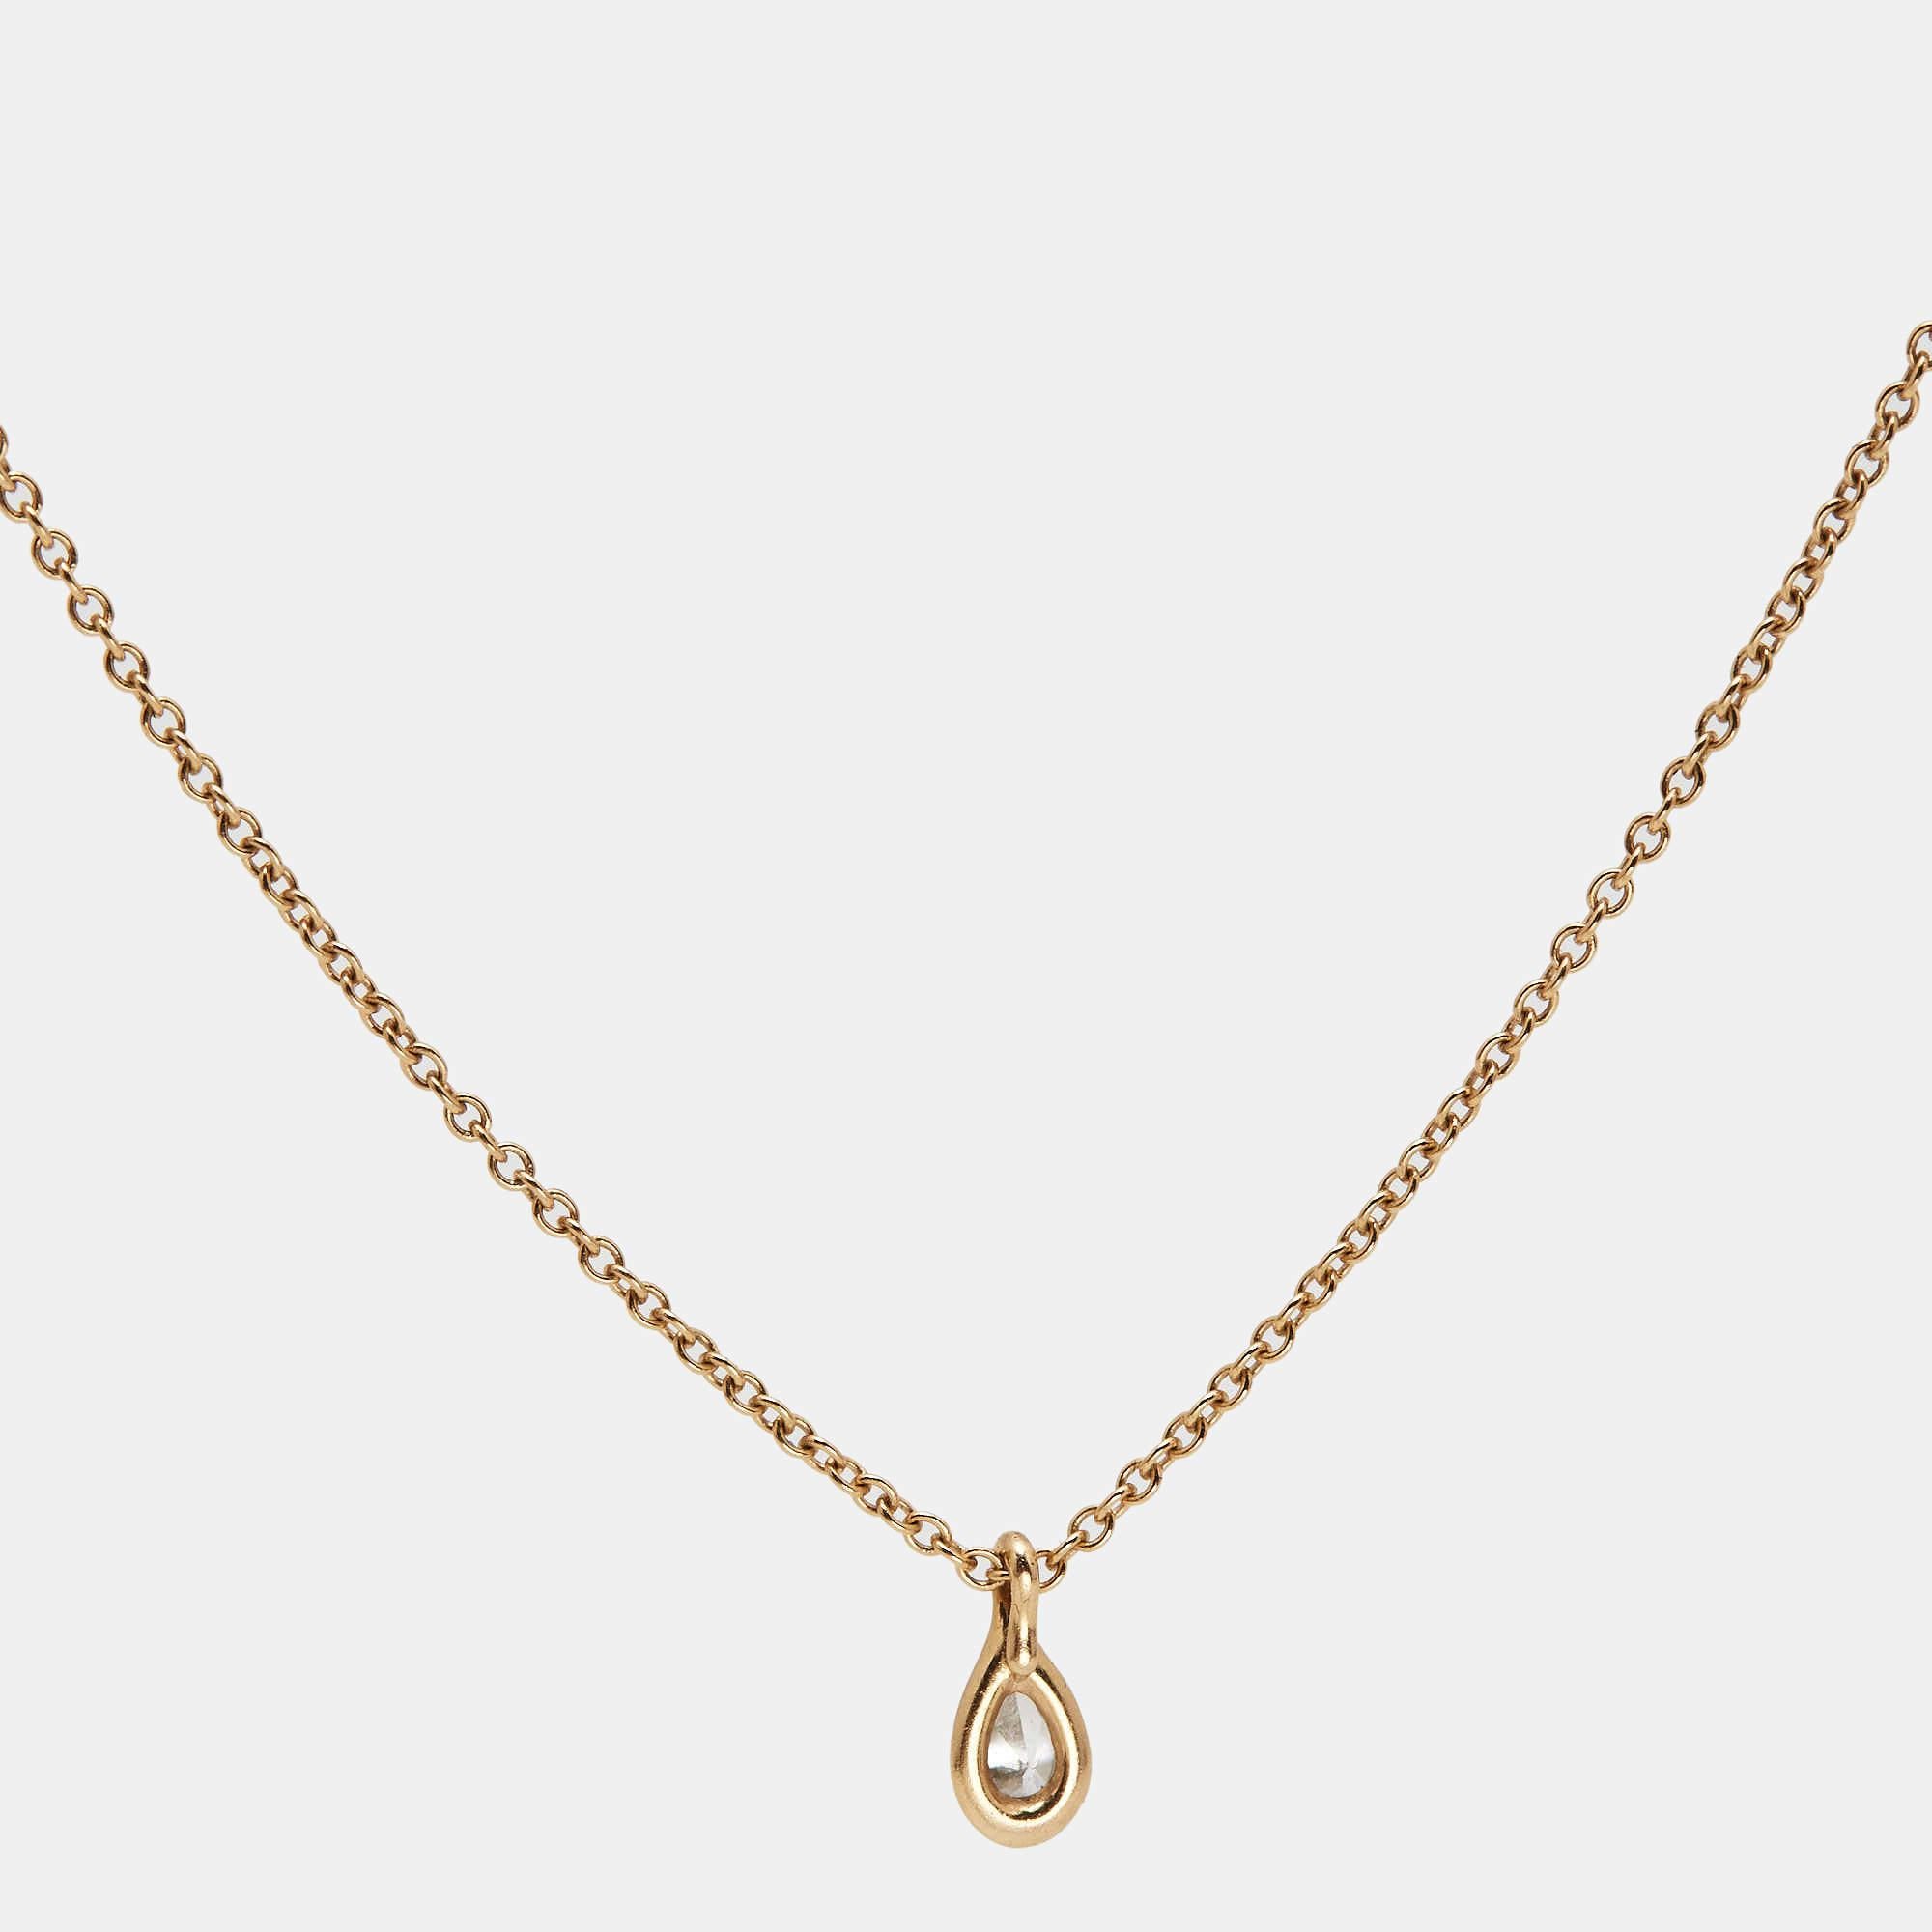 This gorgeous Tiffany & Co. Elsa Peretti By The Yard necklace is uniquely elegant and chic. Designed in 18K rose gold, this alluring piece features a pear-shaped diamond pendant. Singular and contemporary, this piece will add subtle glamour to your